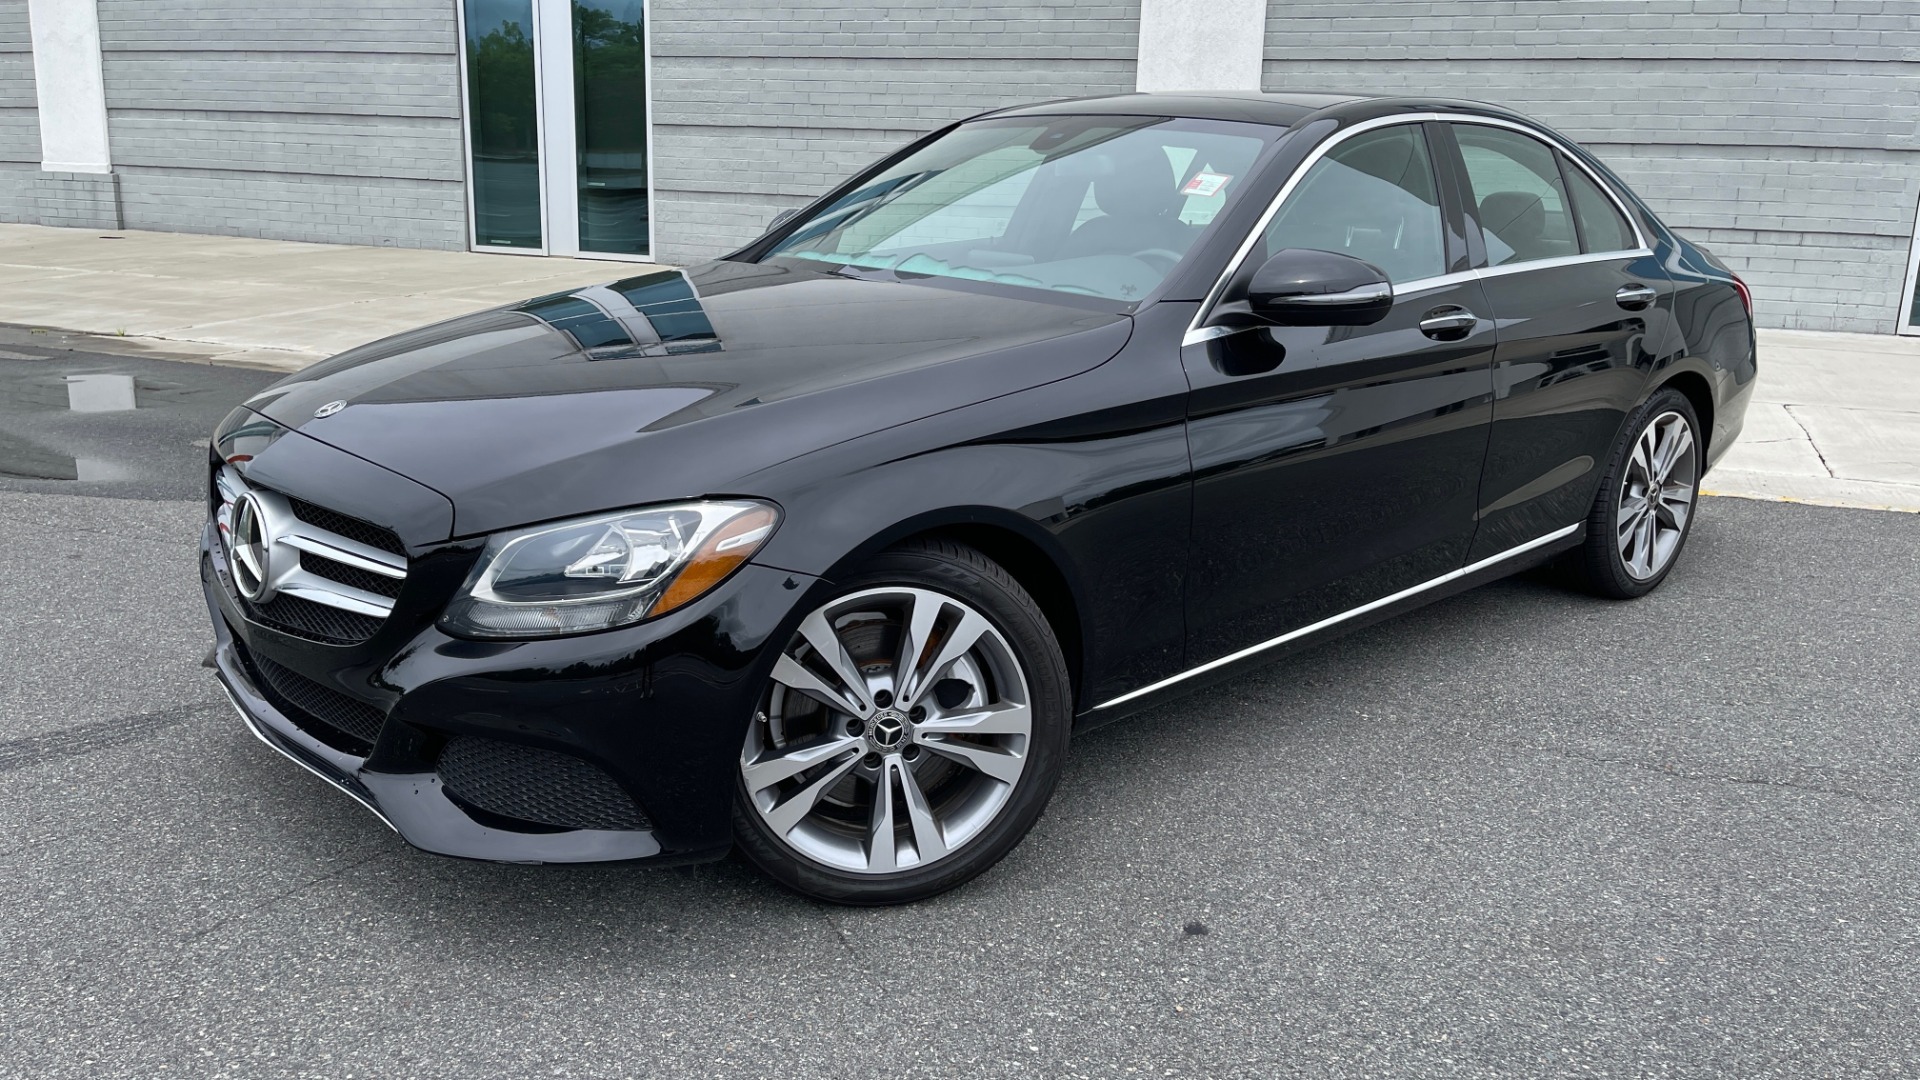 Used 2018 Mercedes-Benz C-CLASS C 300 PREMIUM SEDAN / PANO-ROOF / HTD STS / APPLE / REARVIEW for sale Sold at Formula Imports in Charlotte NC 28227 1